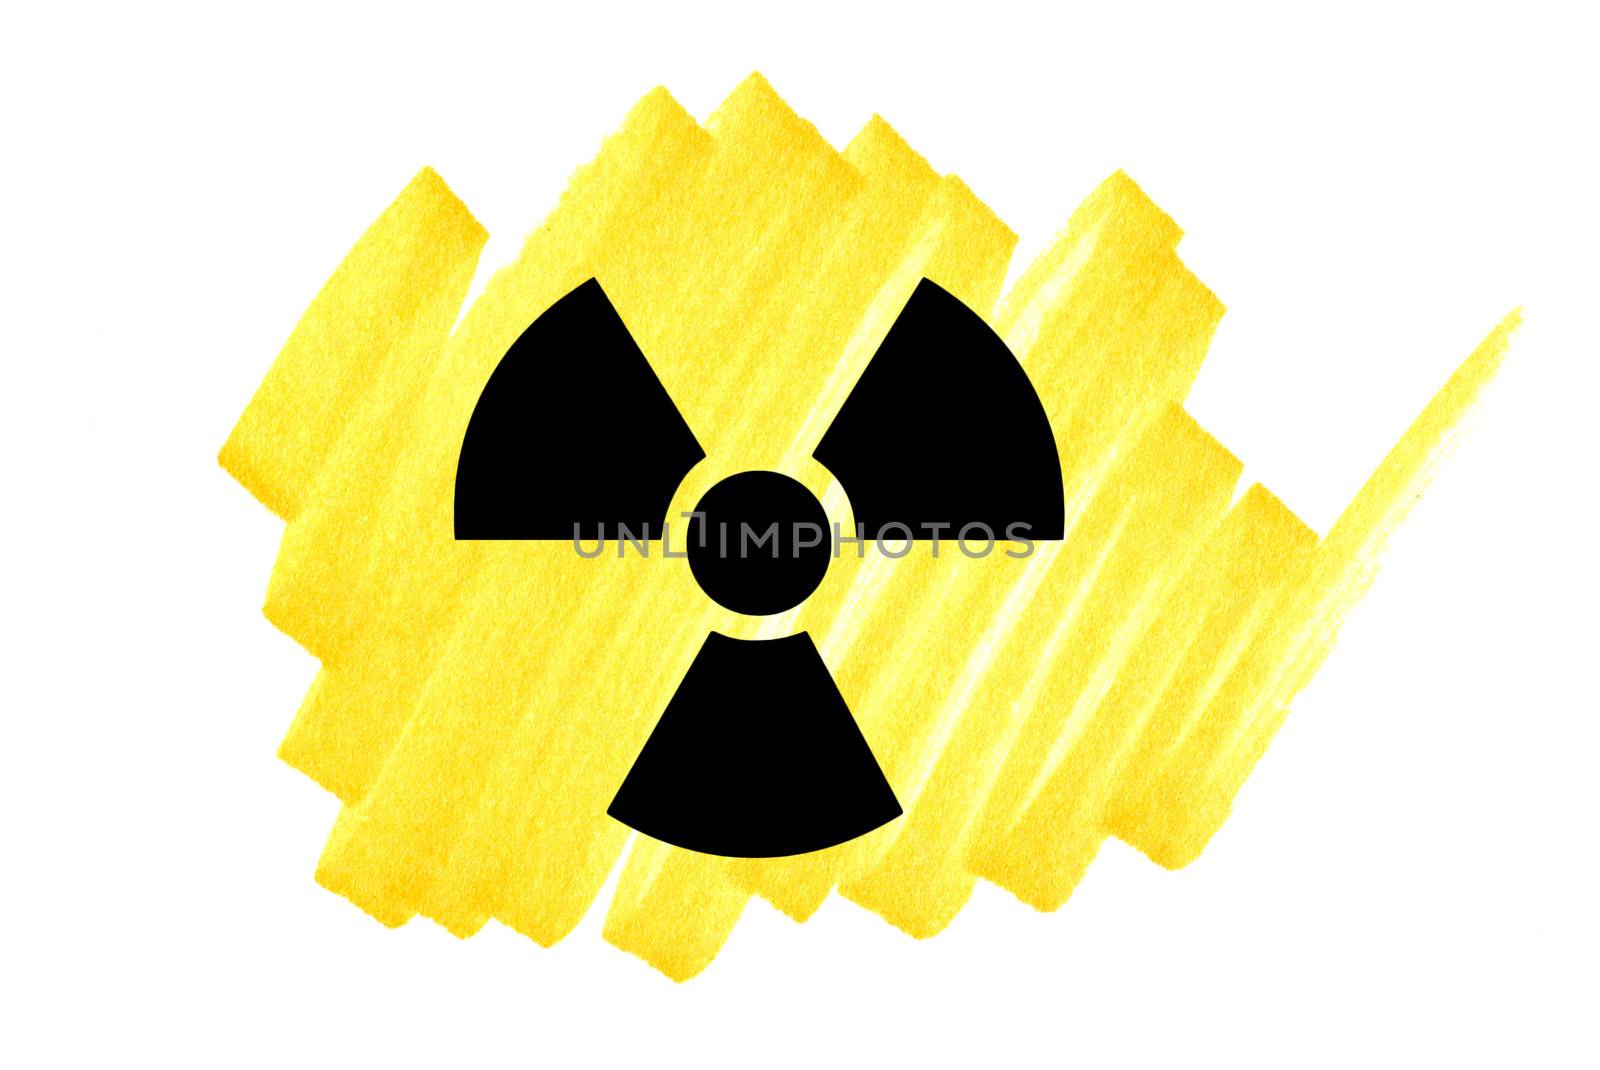 Radioactivity symbol in black on yellow ink marker scribble.